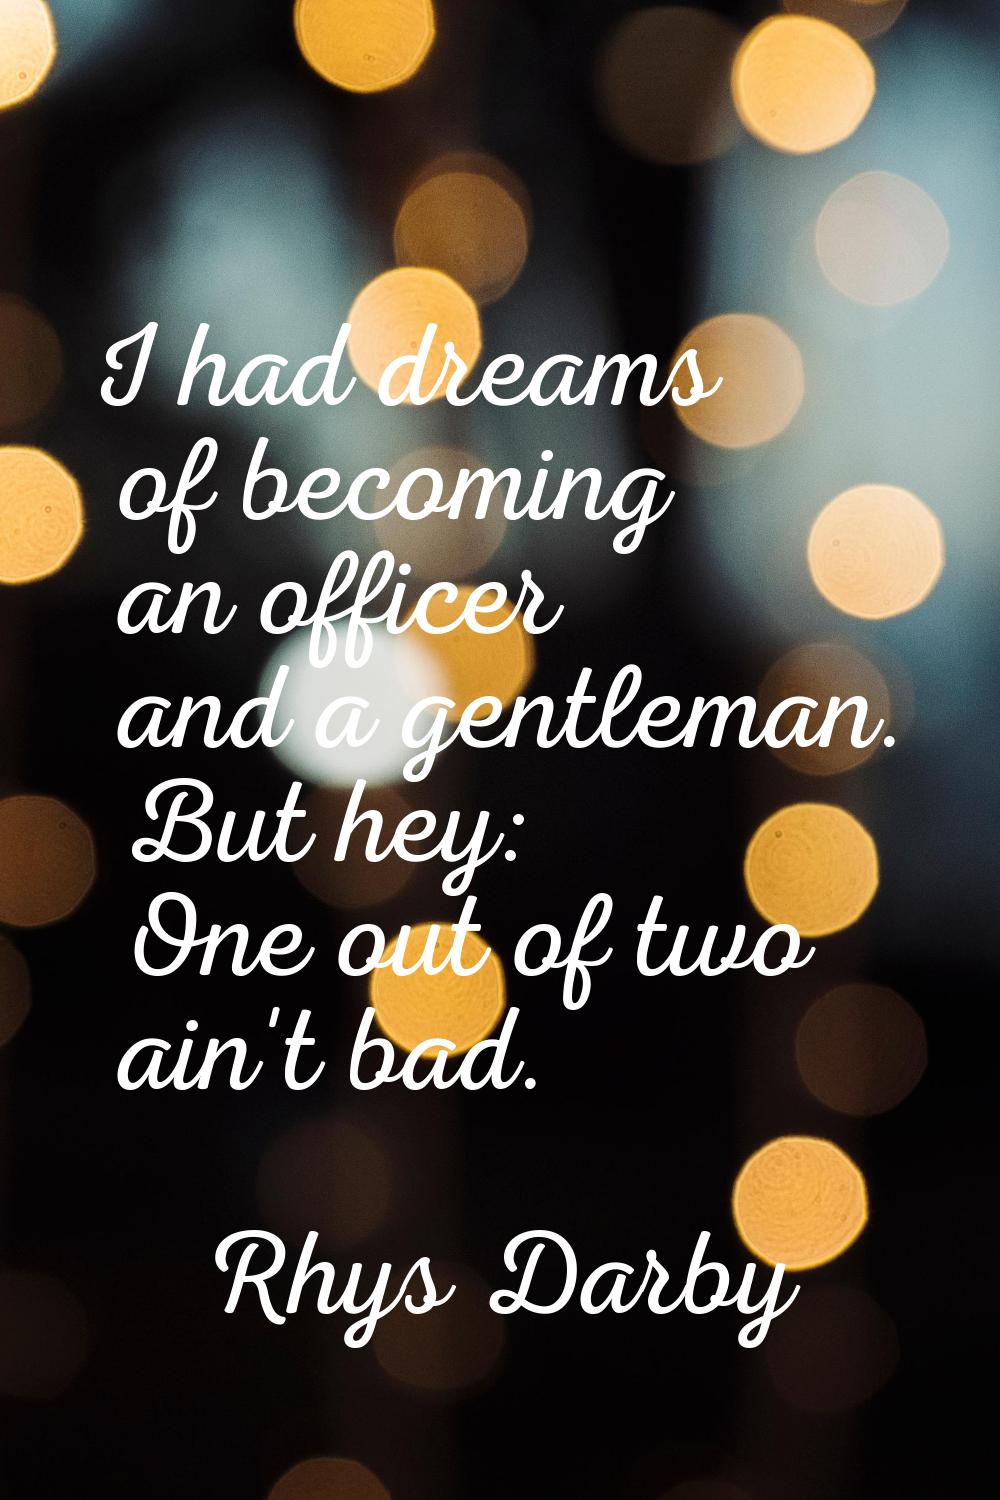 I had dreams of becoming an officer and a gentleman. But hey: One out of two ain't bad.